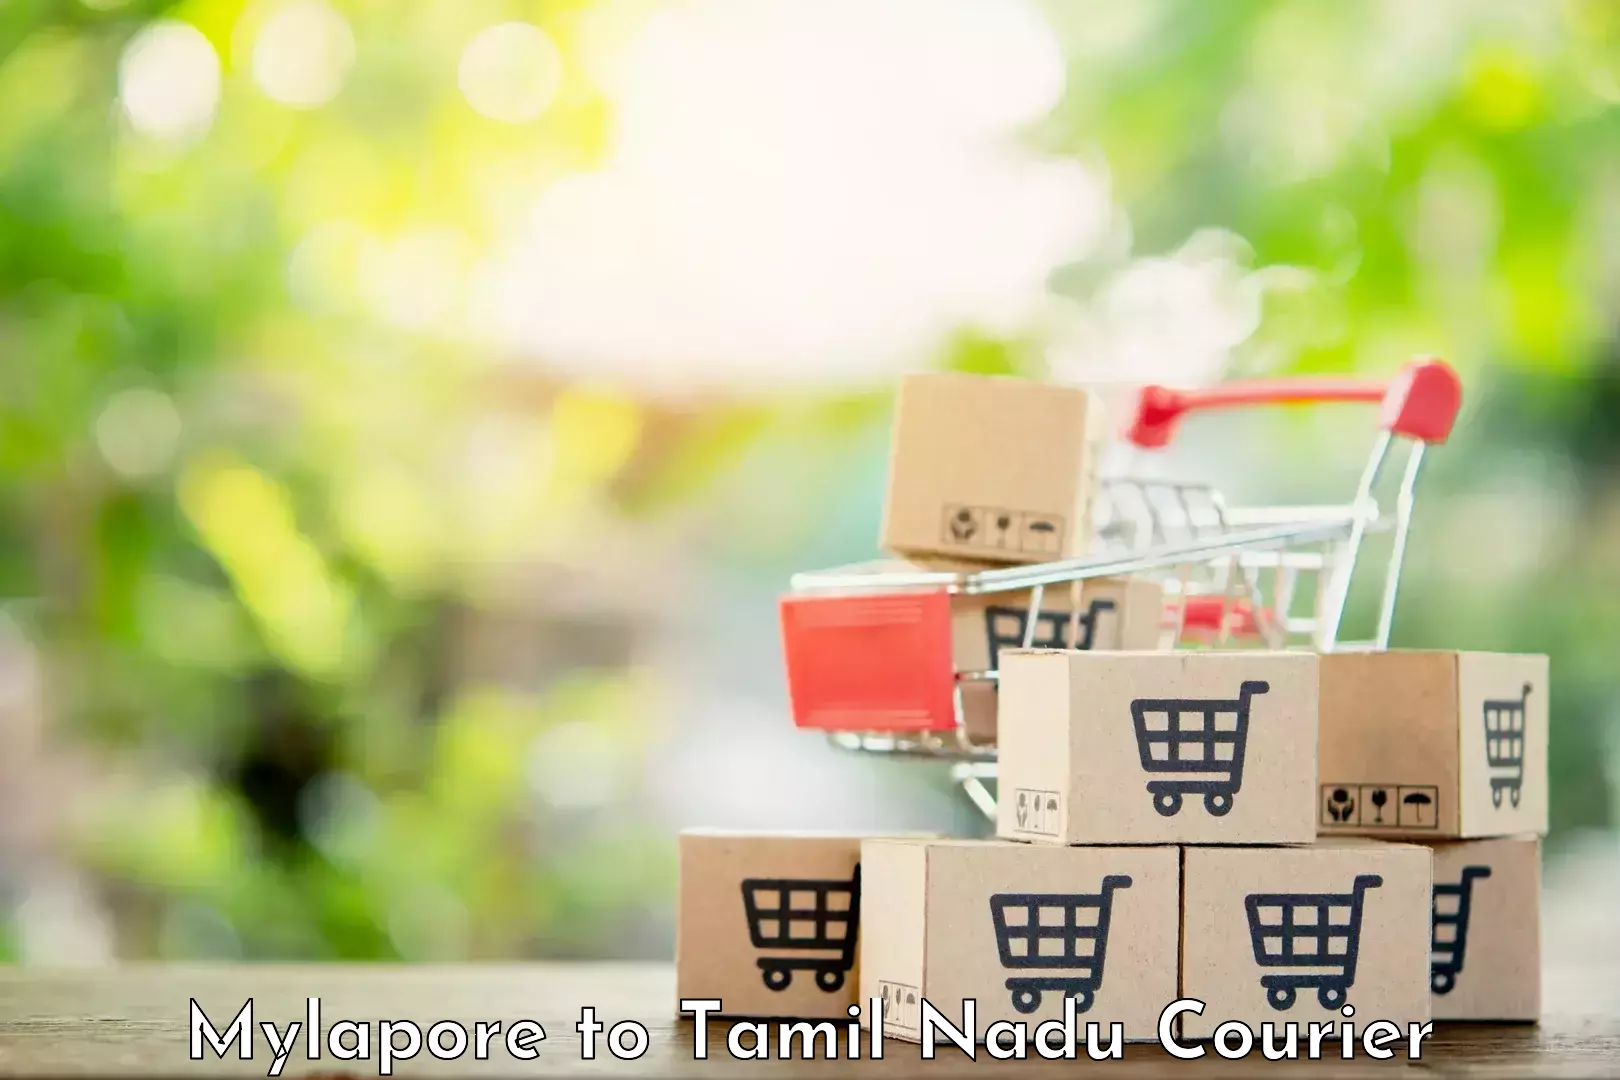 Subscription-based courier Mylapore to Tamil Nadu